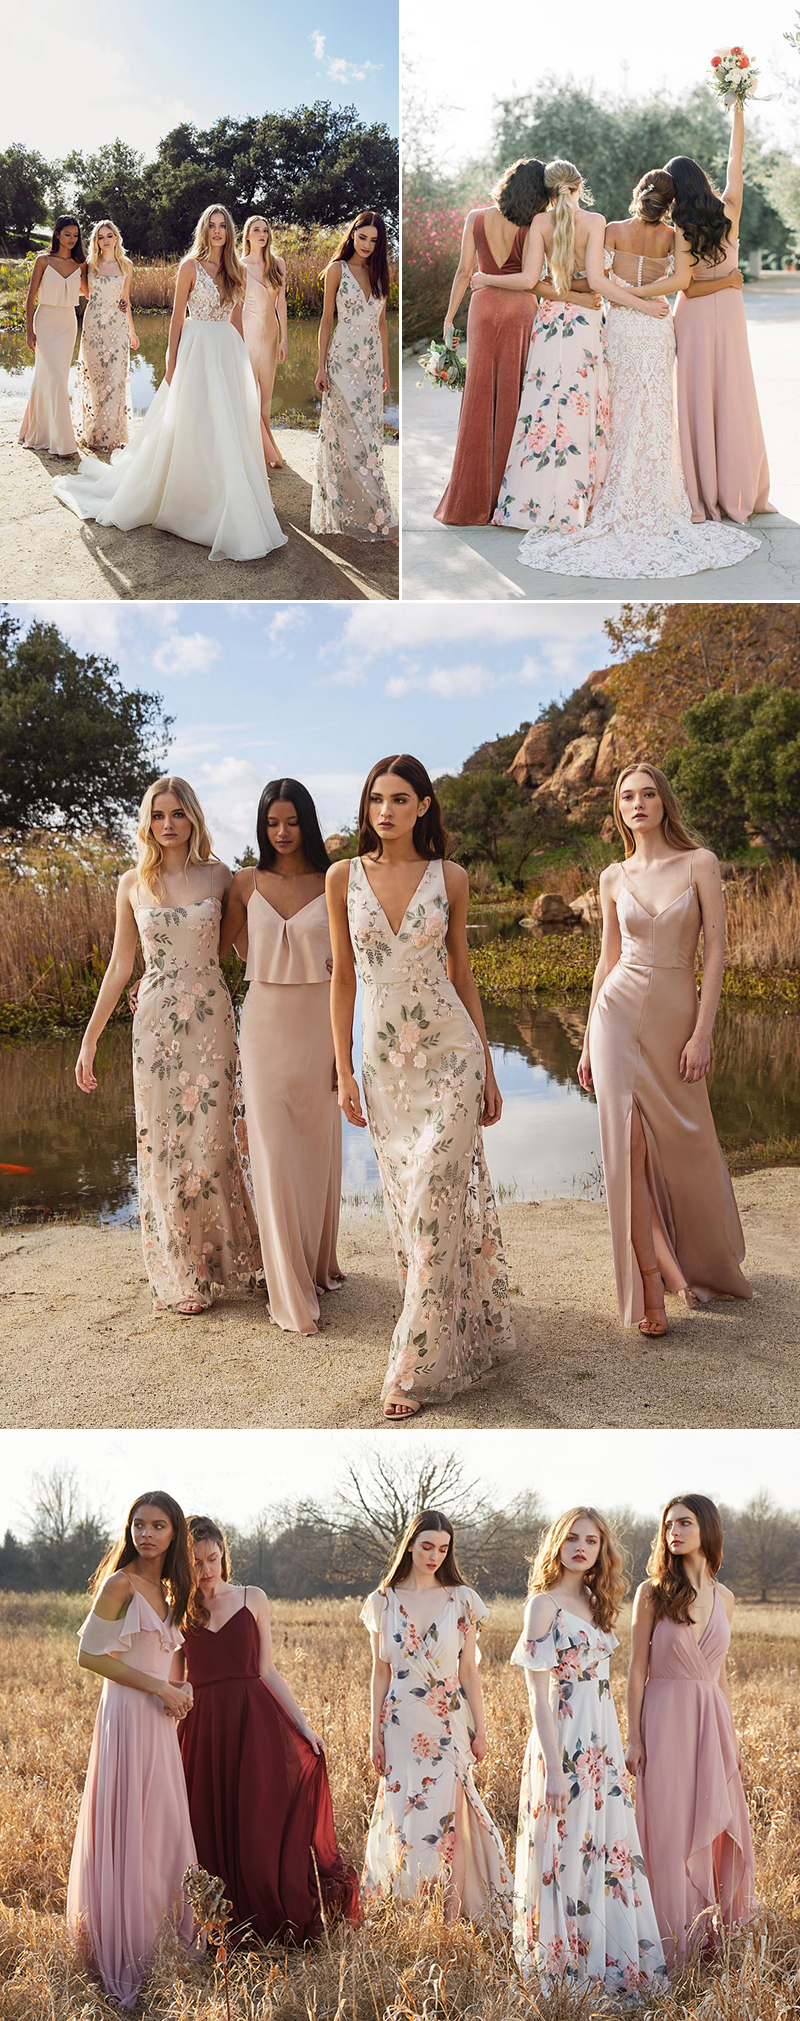 Top 5 Bridesmaid Dress Color Combinations for Spring and Summer